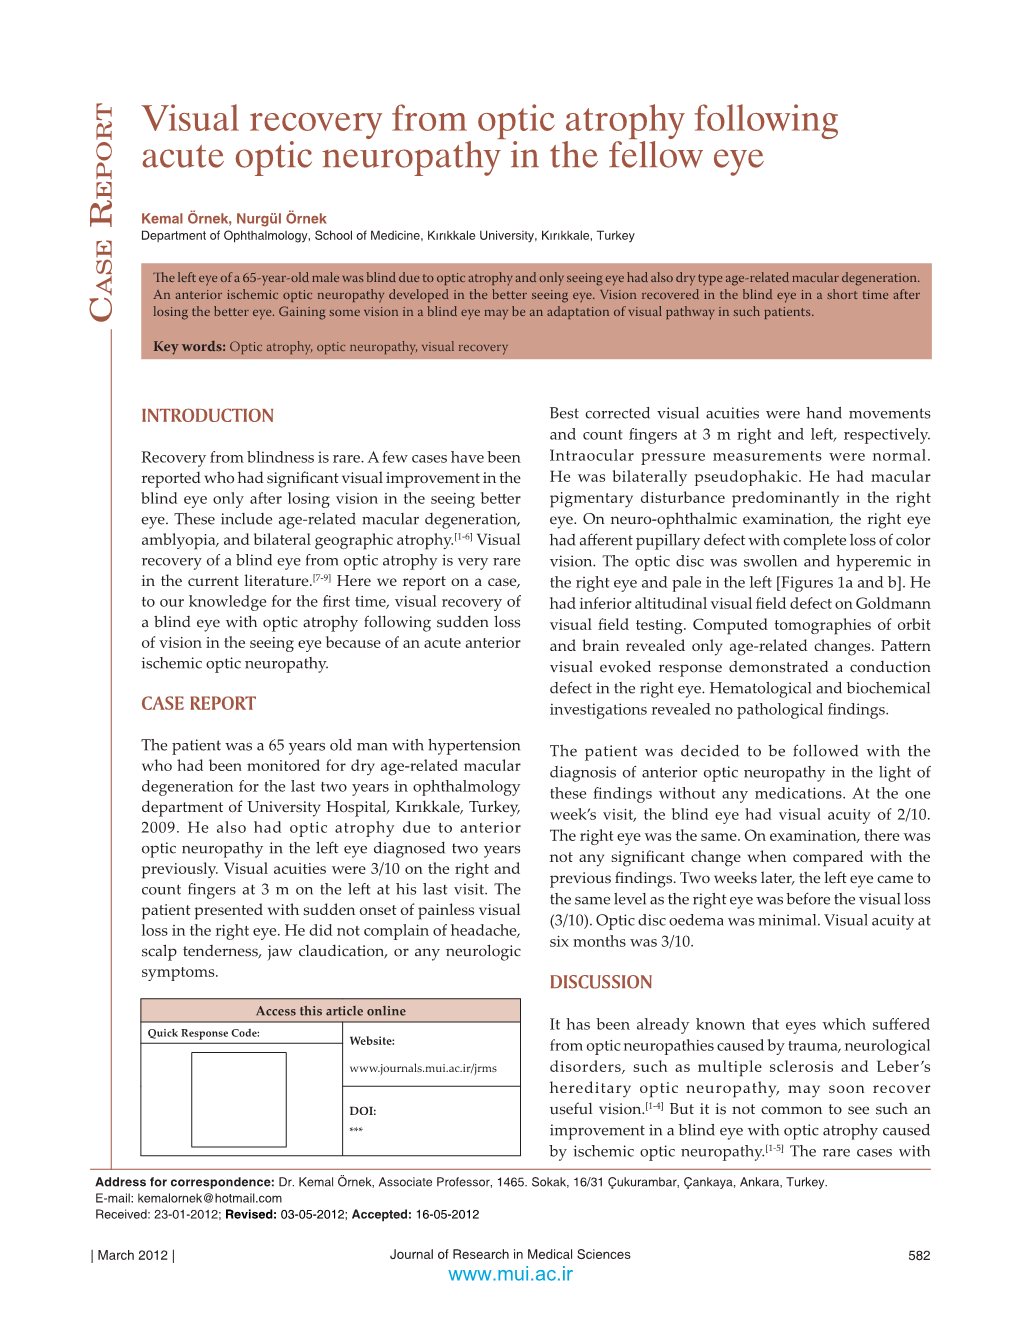 Visual Recovery from Optic Atrophy Following Acute Optic Neuropathy in the Fellow Eye Ep O Rt